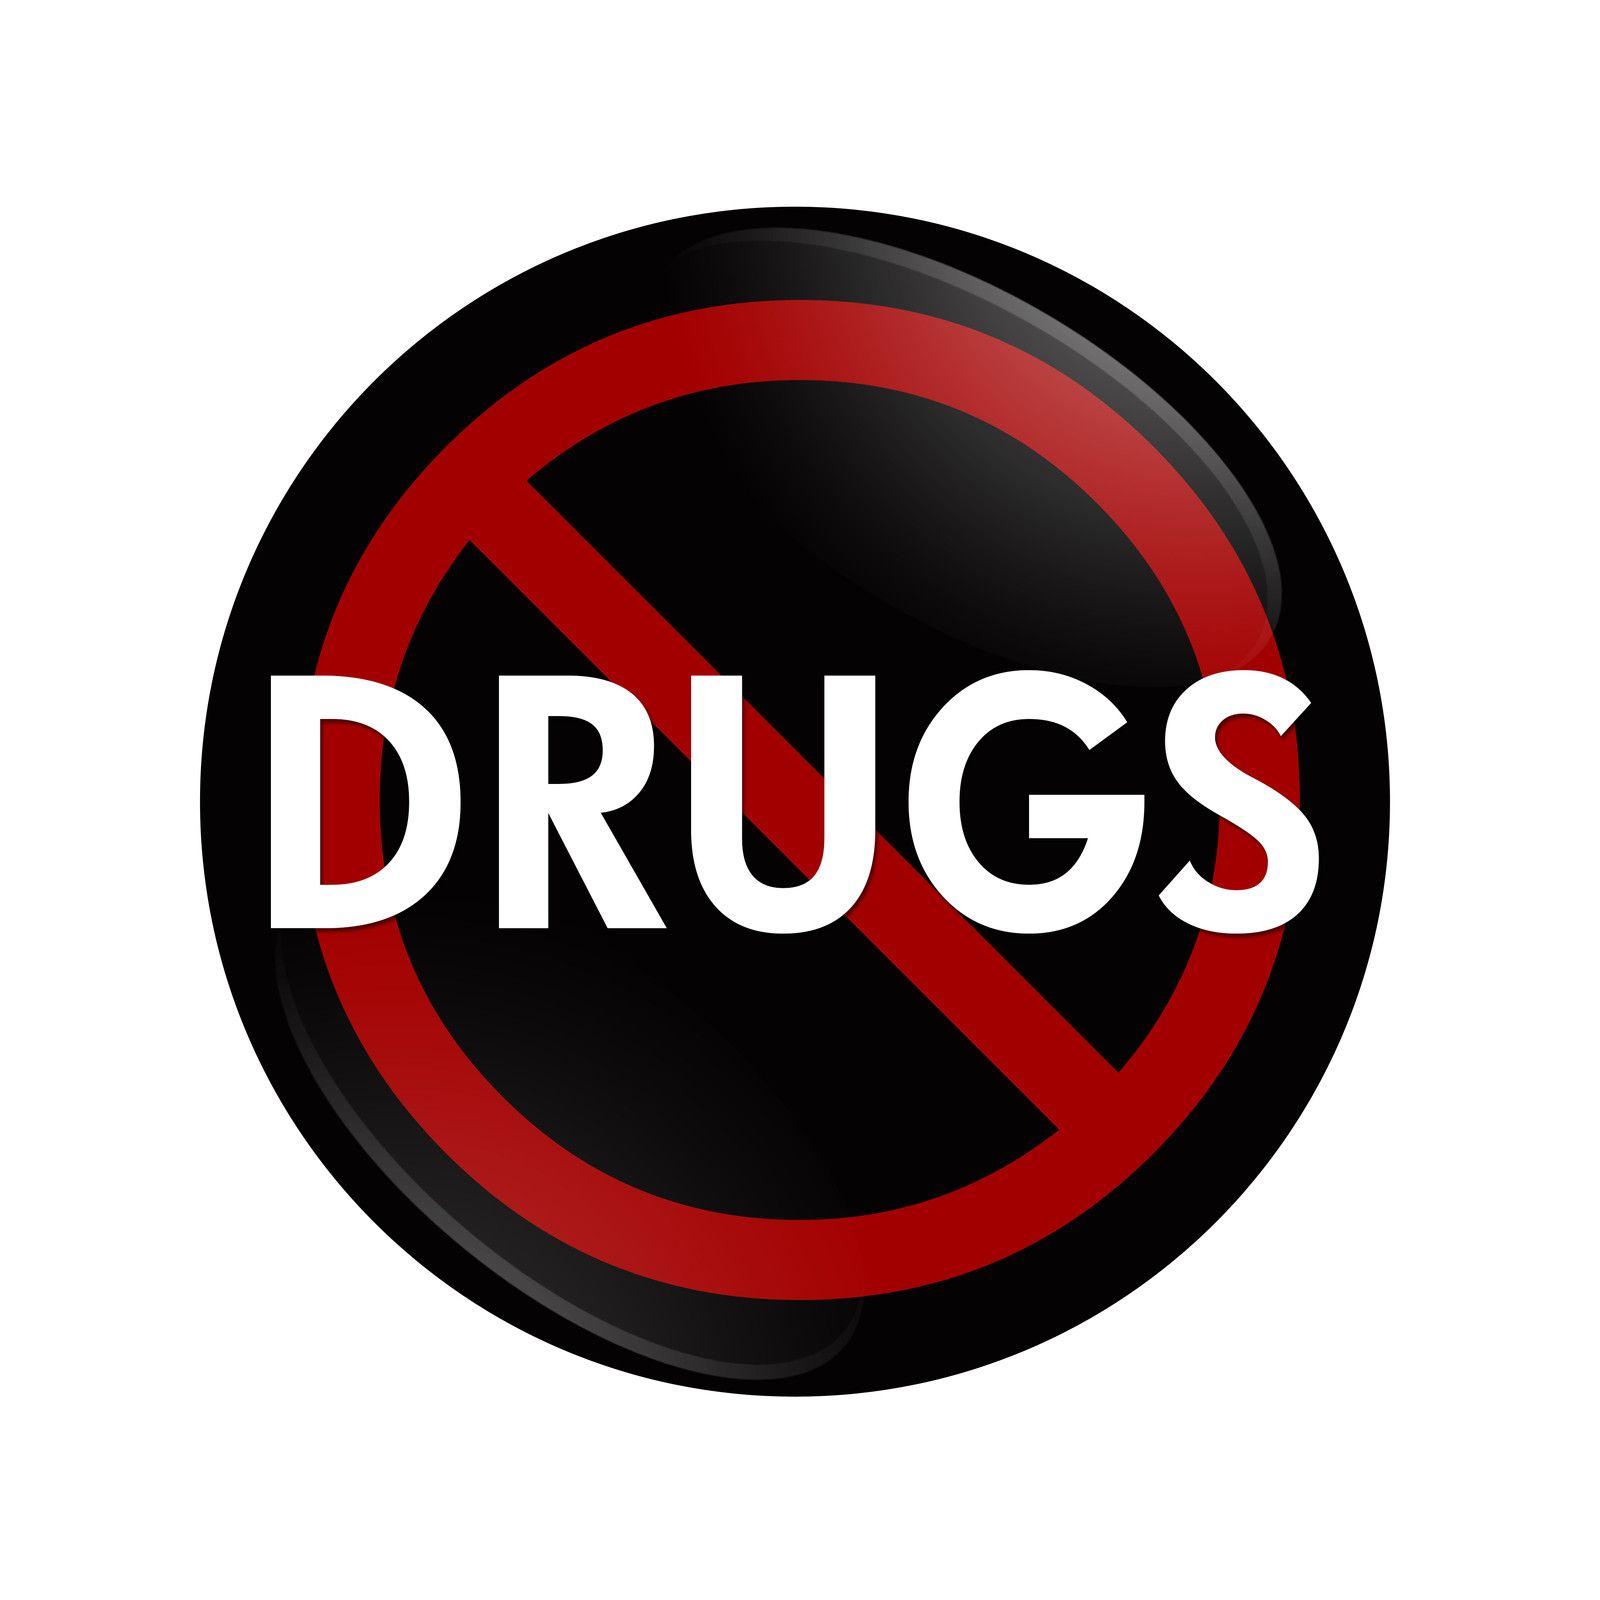 NO DRUGS!. DON'T do Drugs!